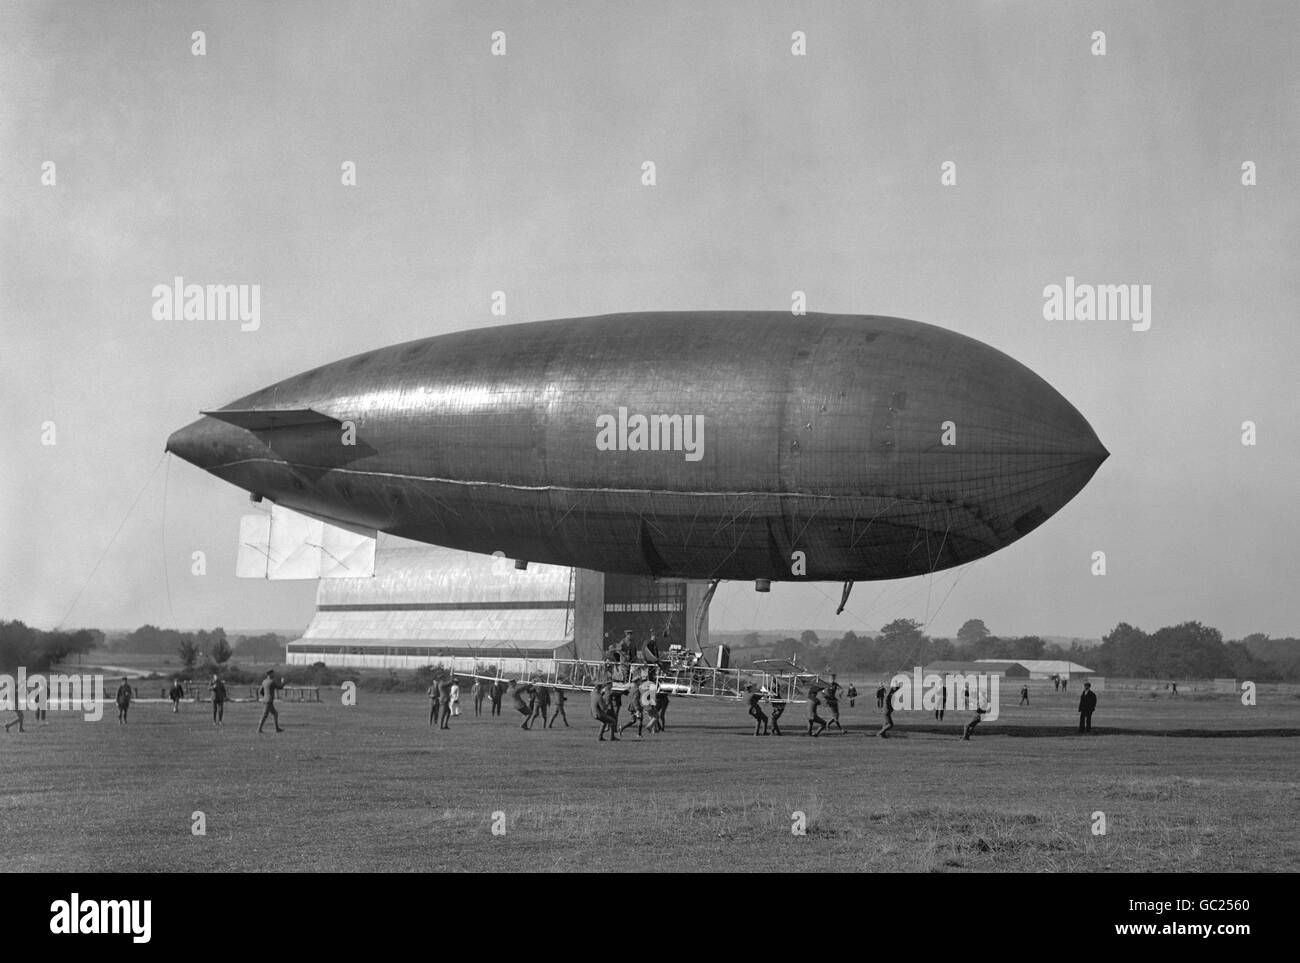 The Royal Flying Corp Airship 'Beta' at the HM Balloon Factory at Farnborough, Hampshire. It flew from the beginning of June, 1910 to July 13th, 1910 when she crashed at Andover. Stock Photo